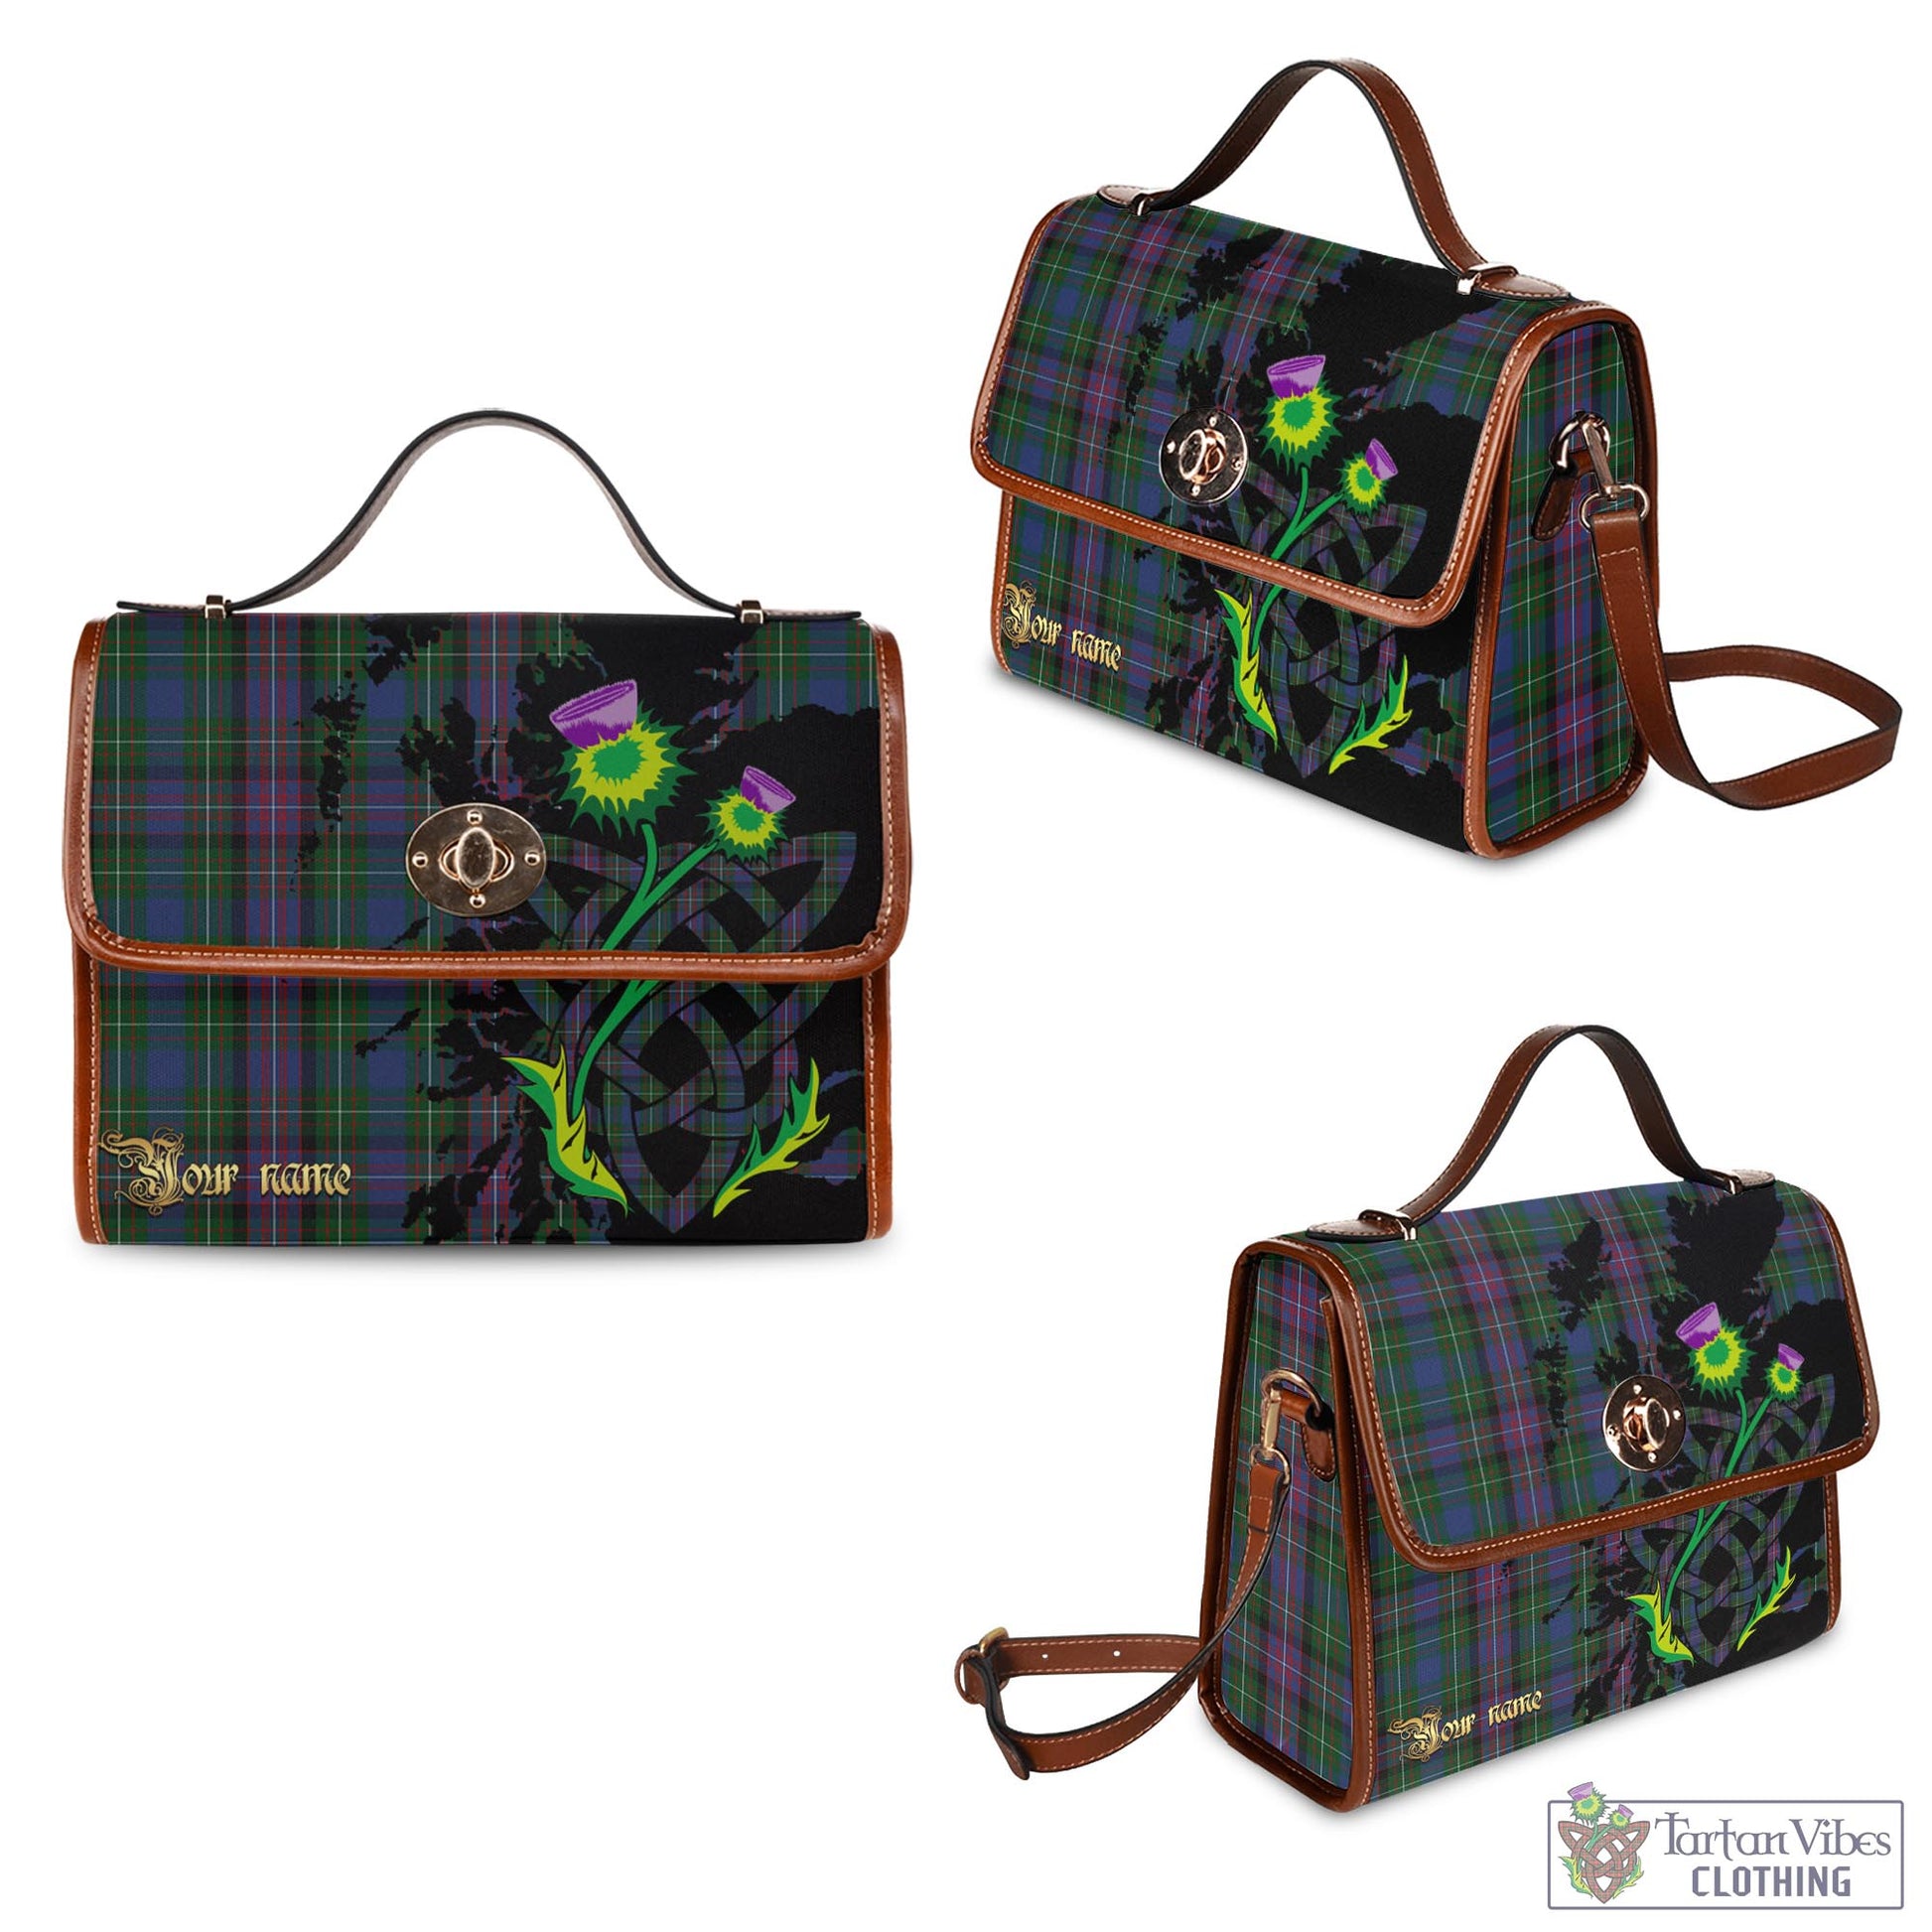 Tartan Vibes Clothing Rankin Tartan Waterproof Canvas Bag with Scotland Map and Thistle Celtic Accents